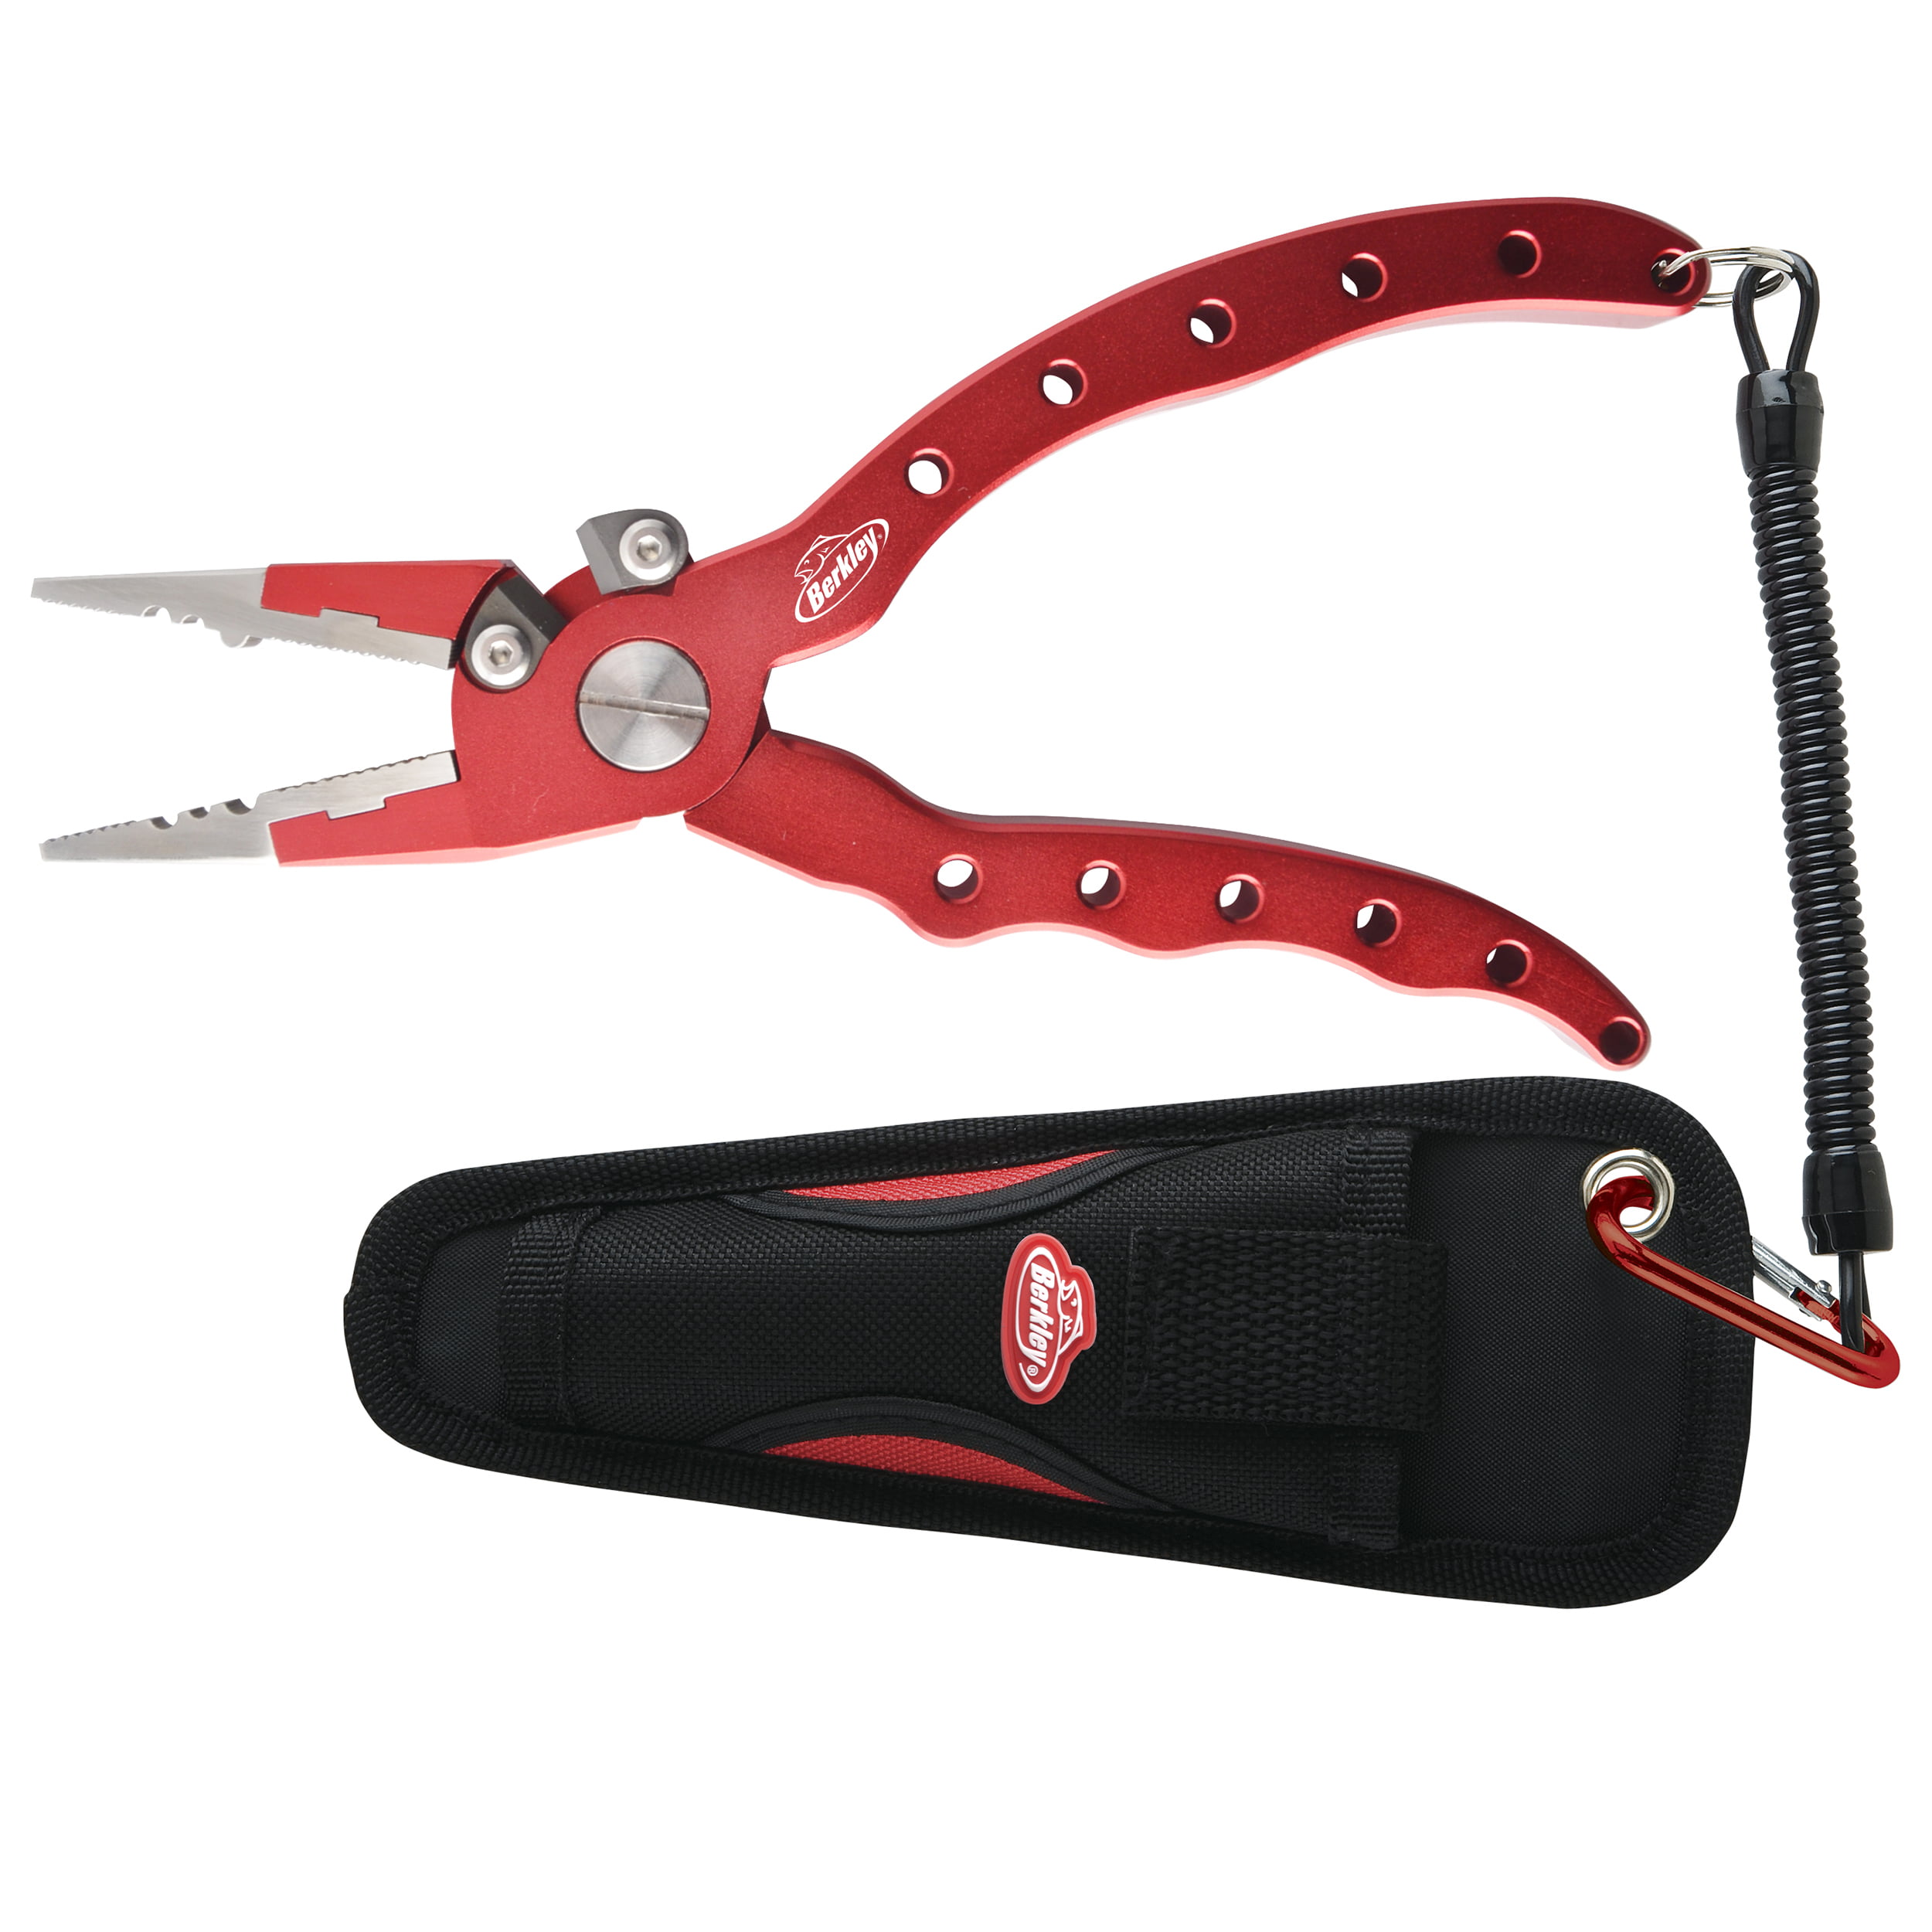 Fishing Pliers Fishing Pliers, Aviation Aluminum Fishing Pliers Line  Cutters, De-Hookers, Fishing Tool Sets, Saltwater Resistant Fishing Gear  with